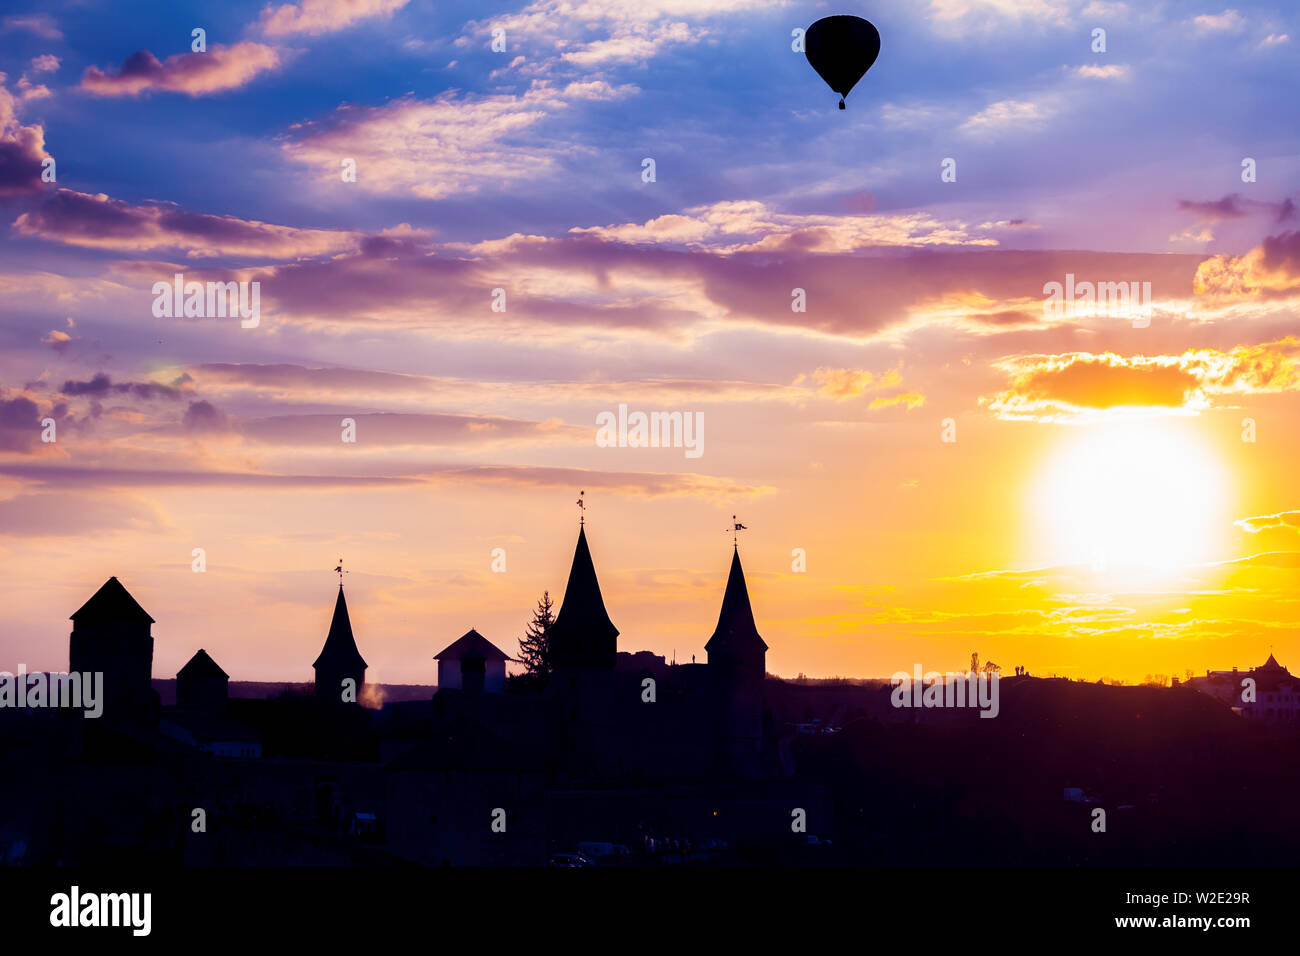 View on the castle in Kamianets Podilskyi and black air balloon during sunset. Ukraine Stock Photo